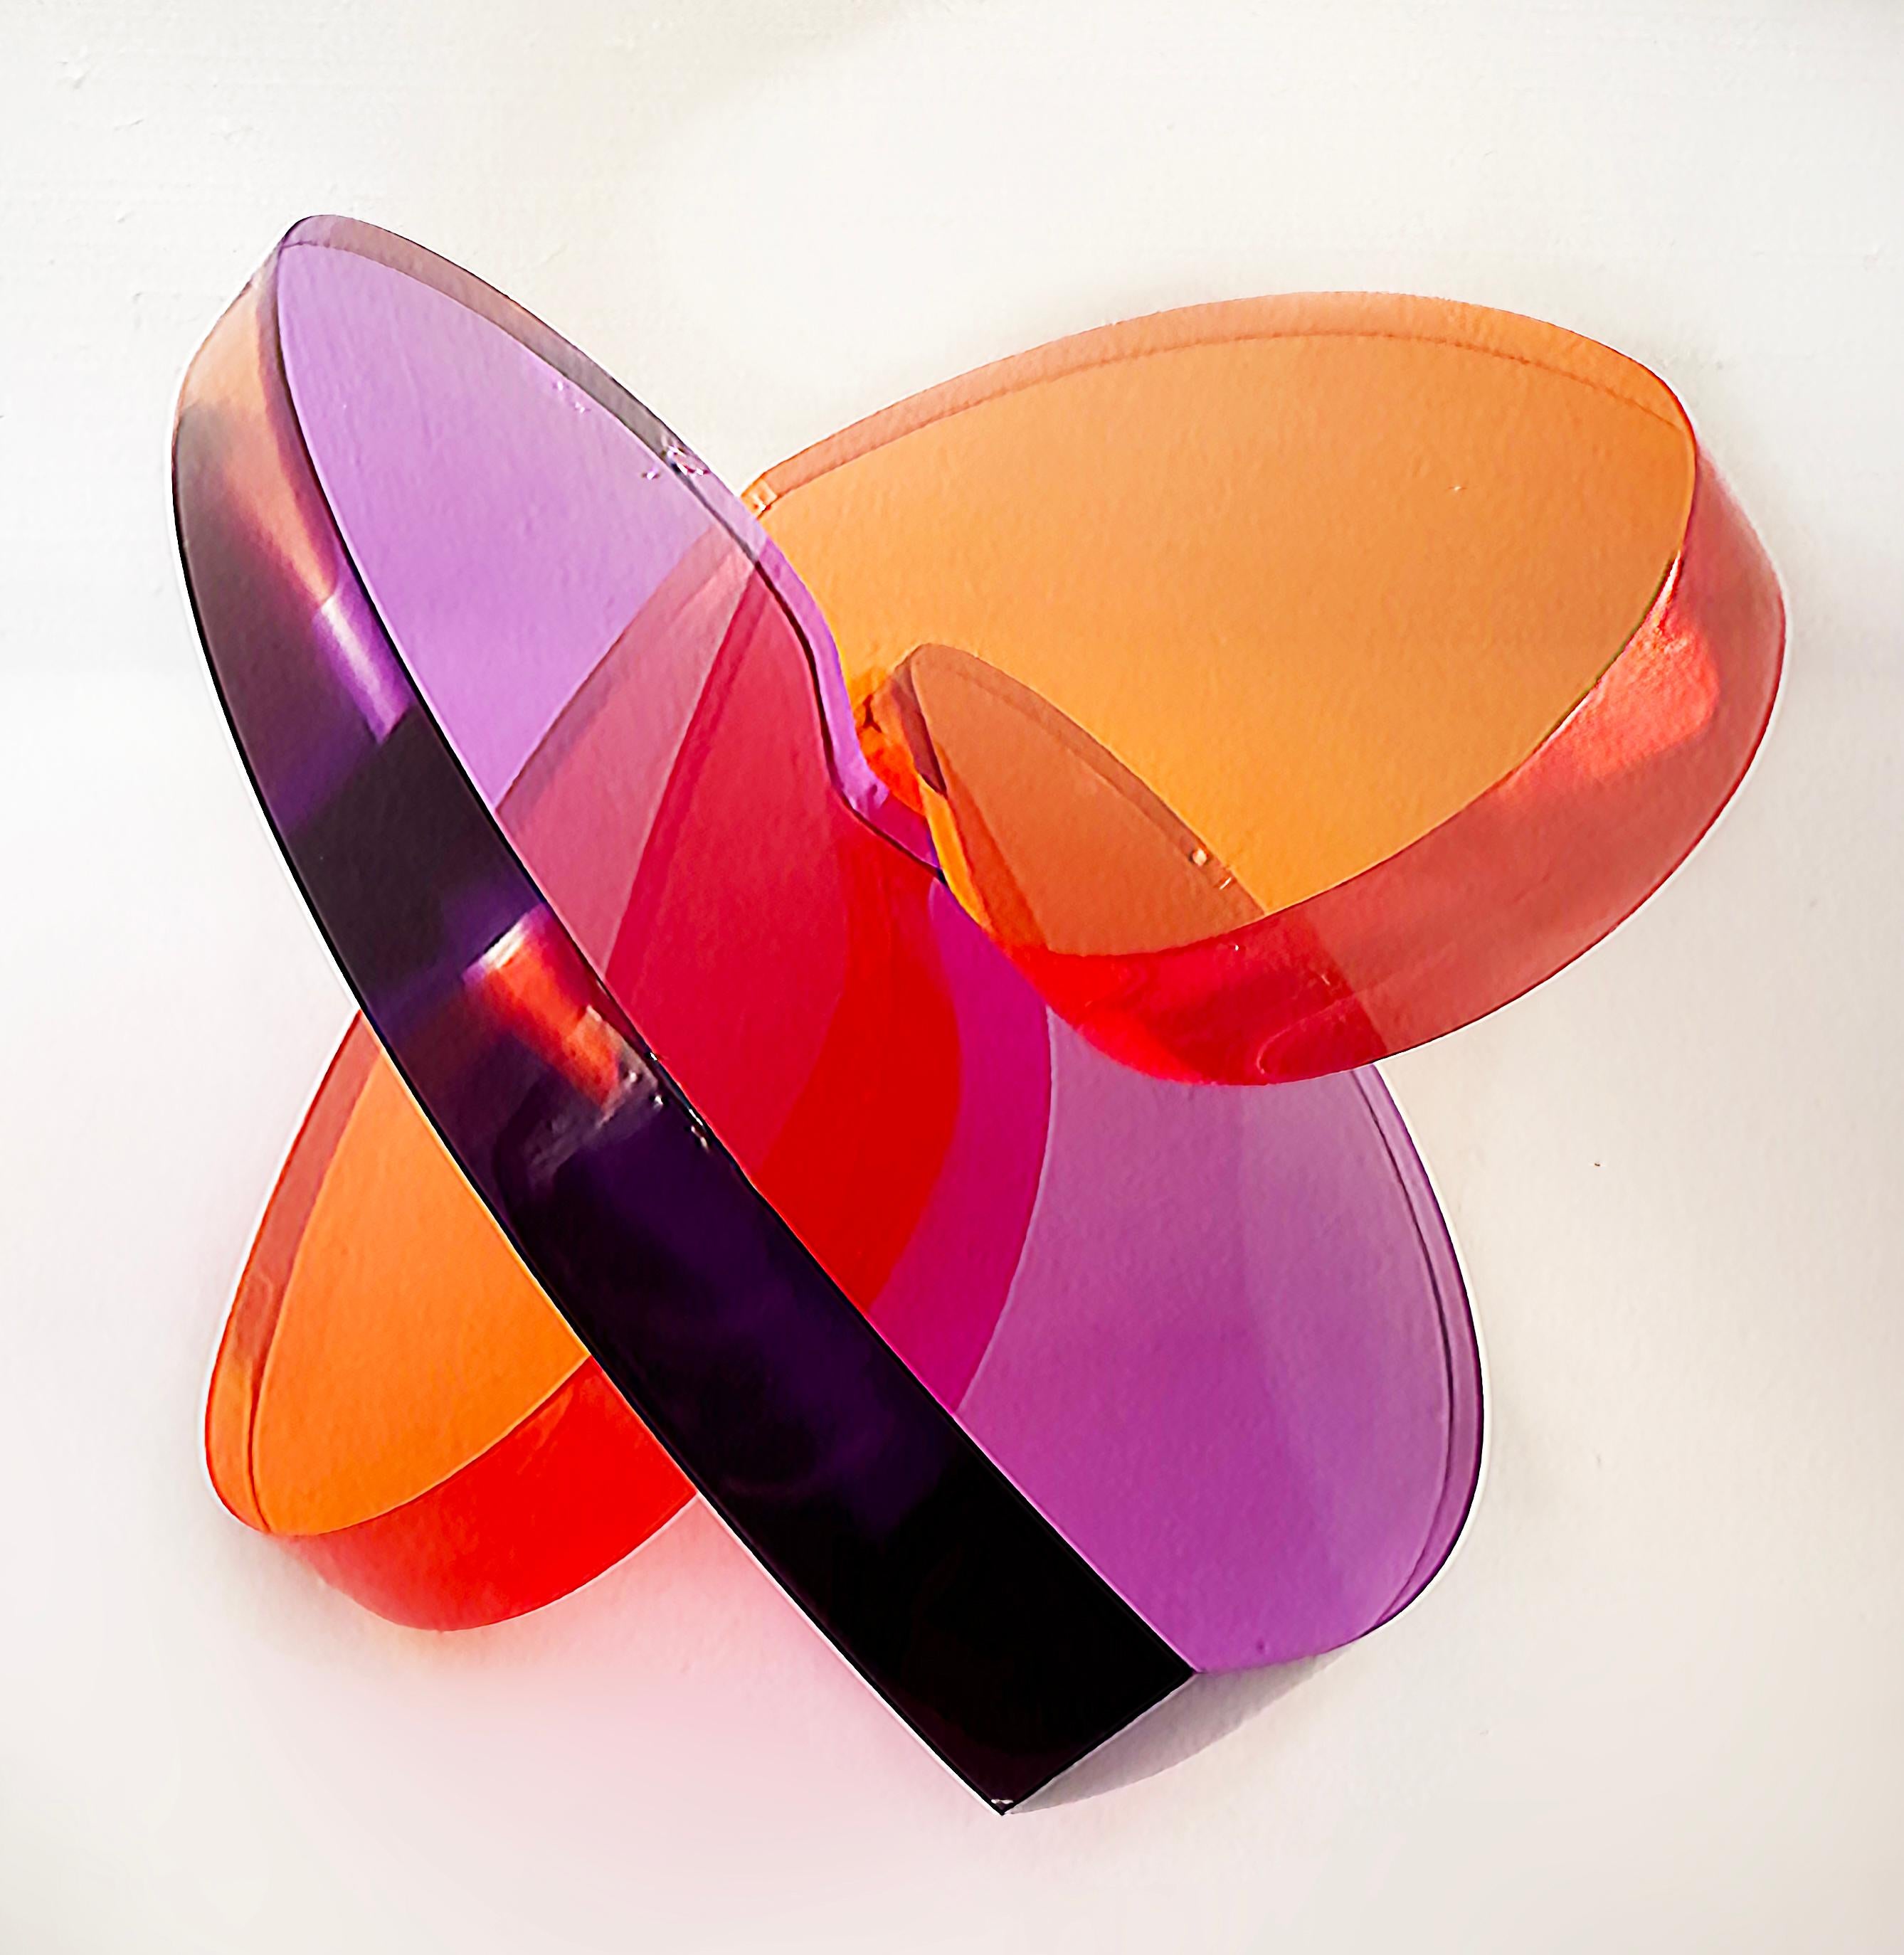 Contemporary Lucite Interlocking Hearts  Sculpture by Michael Gitter Available in Many Colors